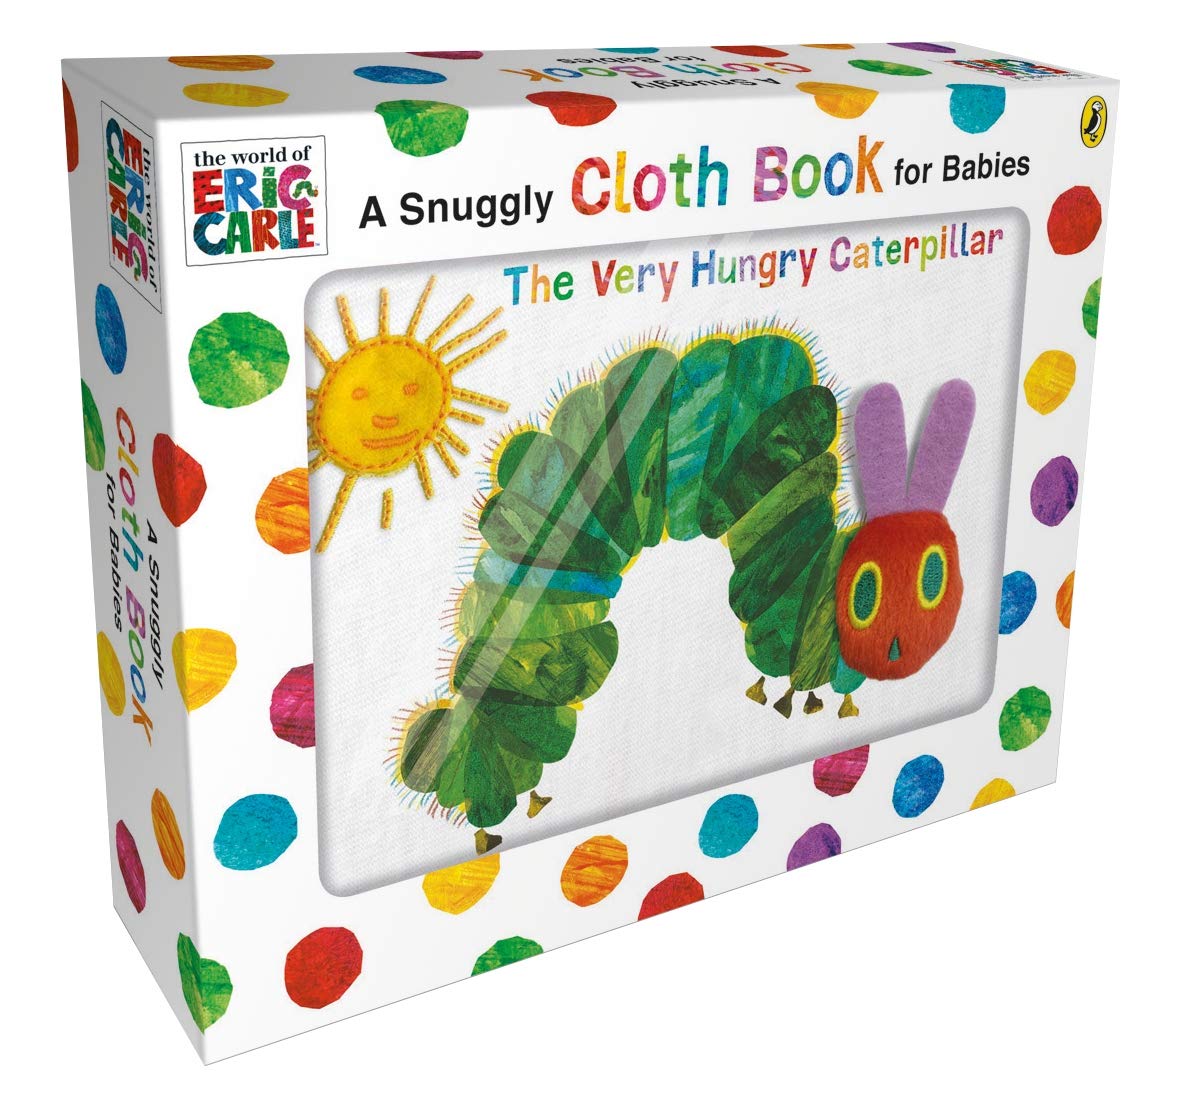 A snuggly cloth book for babies -Very Hungry Caterpillar